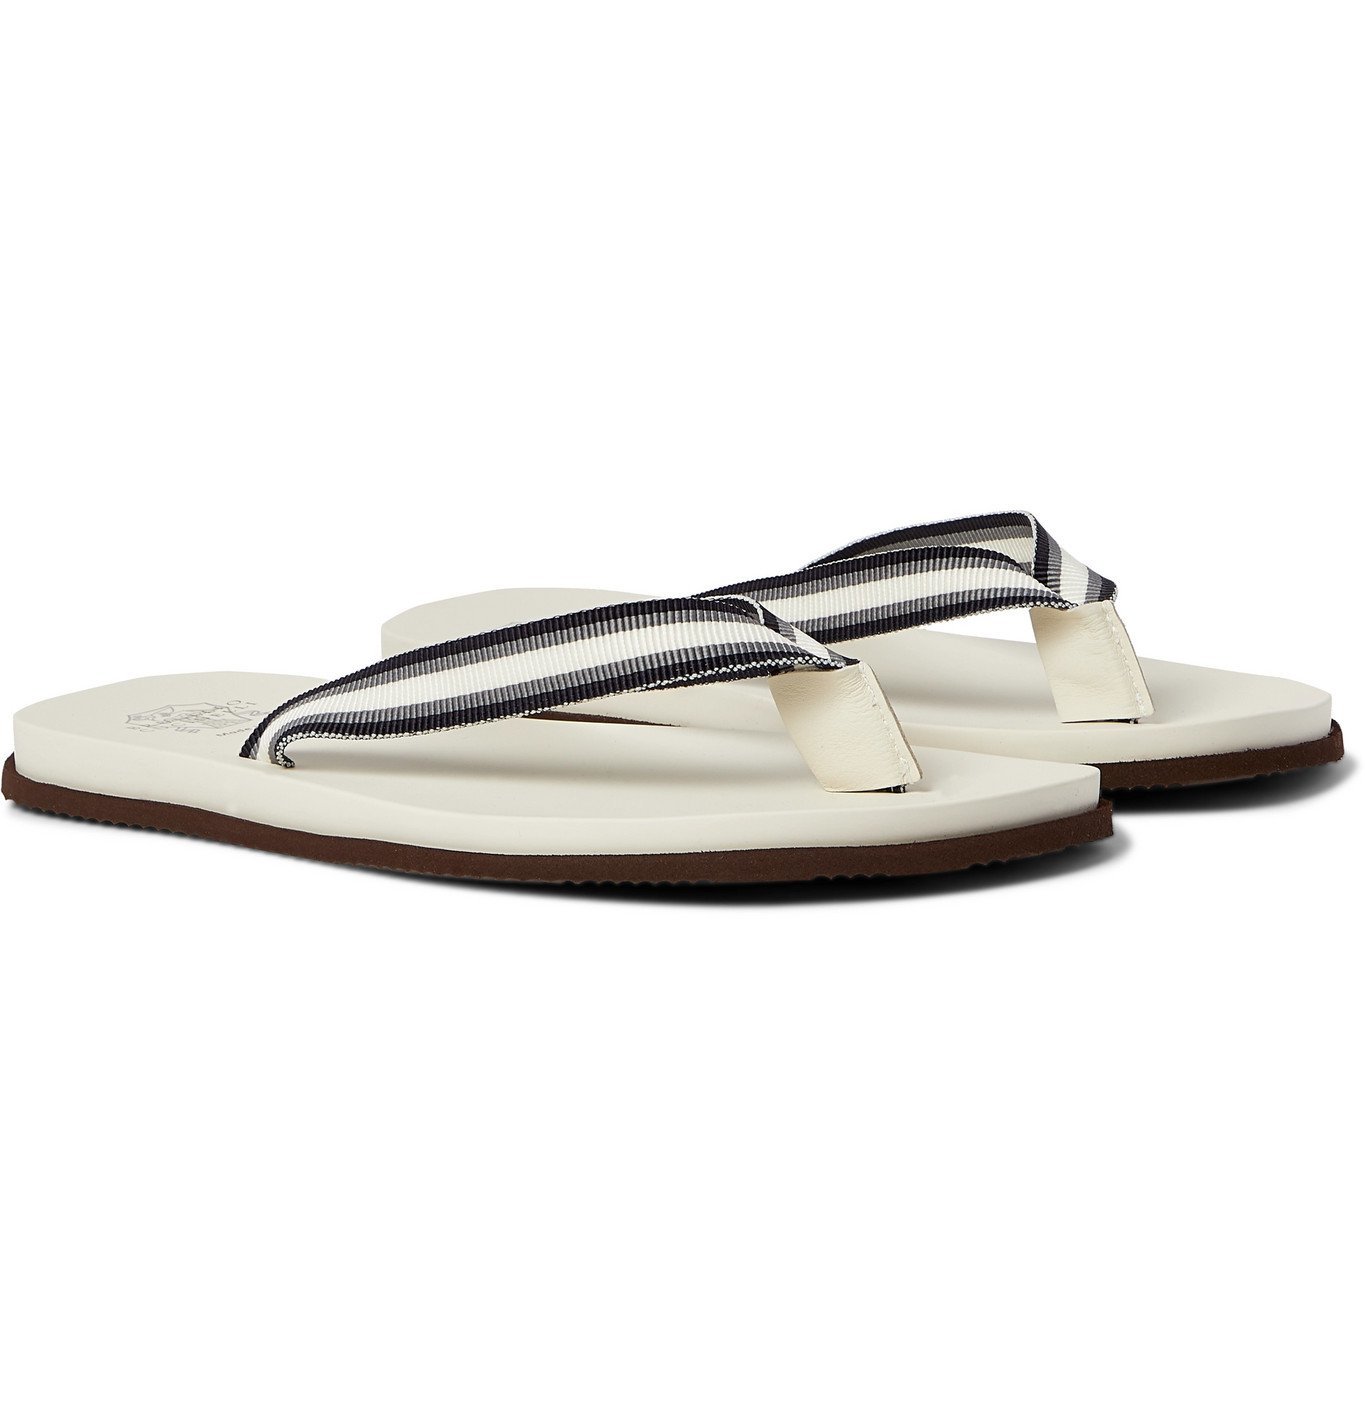 Brunello Cucinelli - Striped Canvas and Leather Flip-Flops - White ...